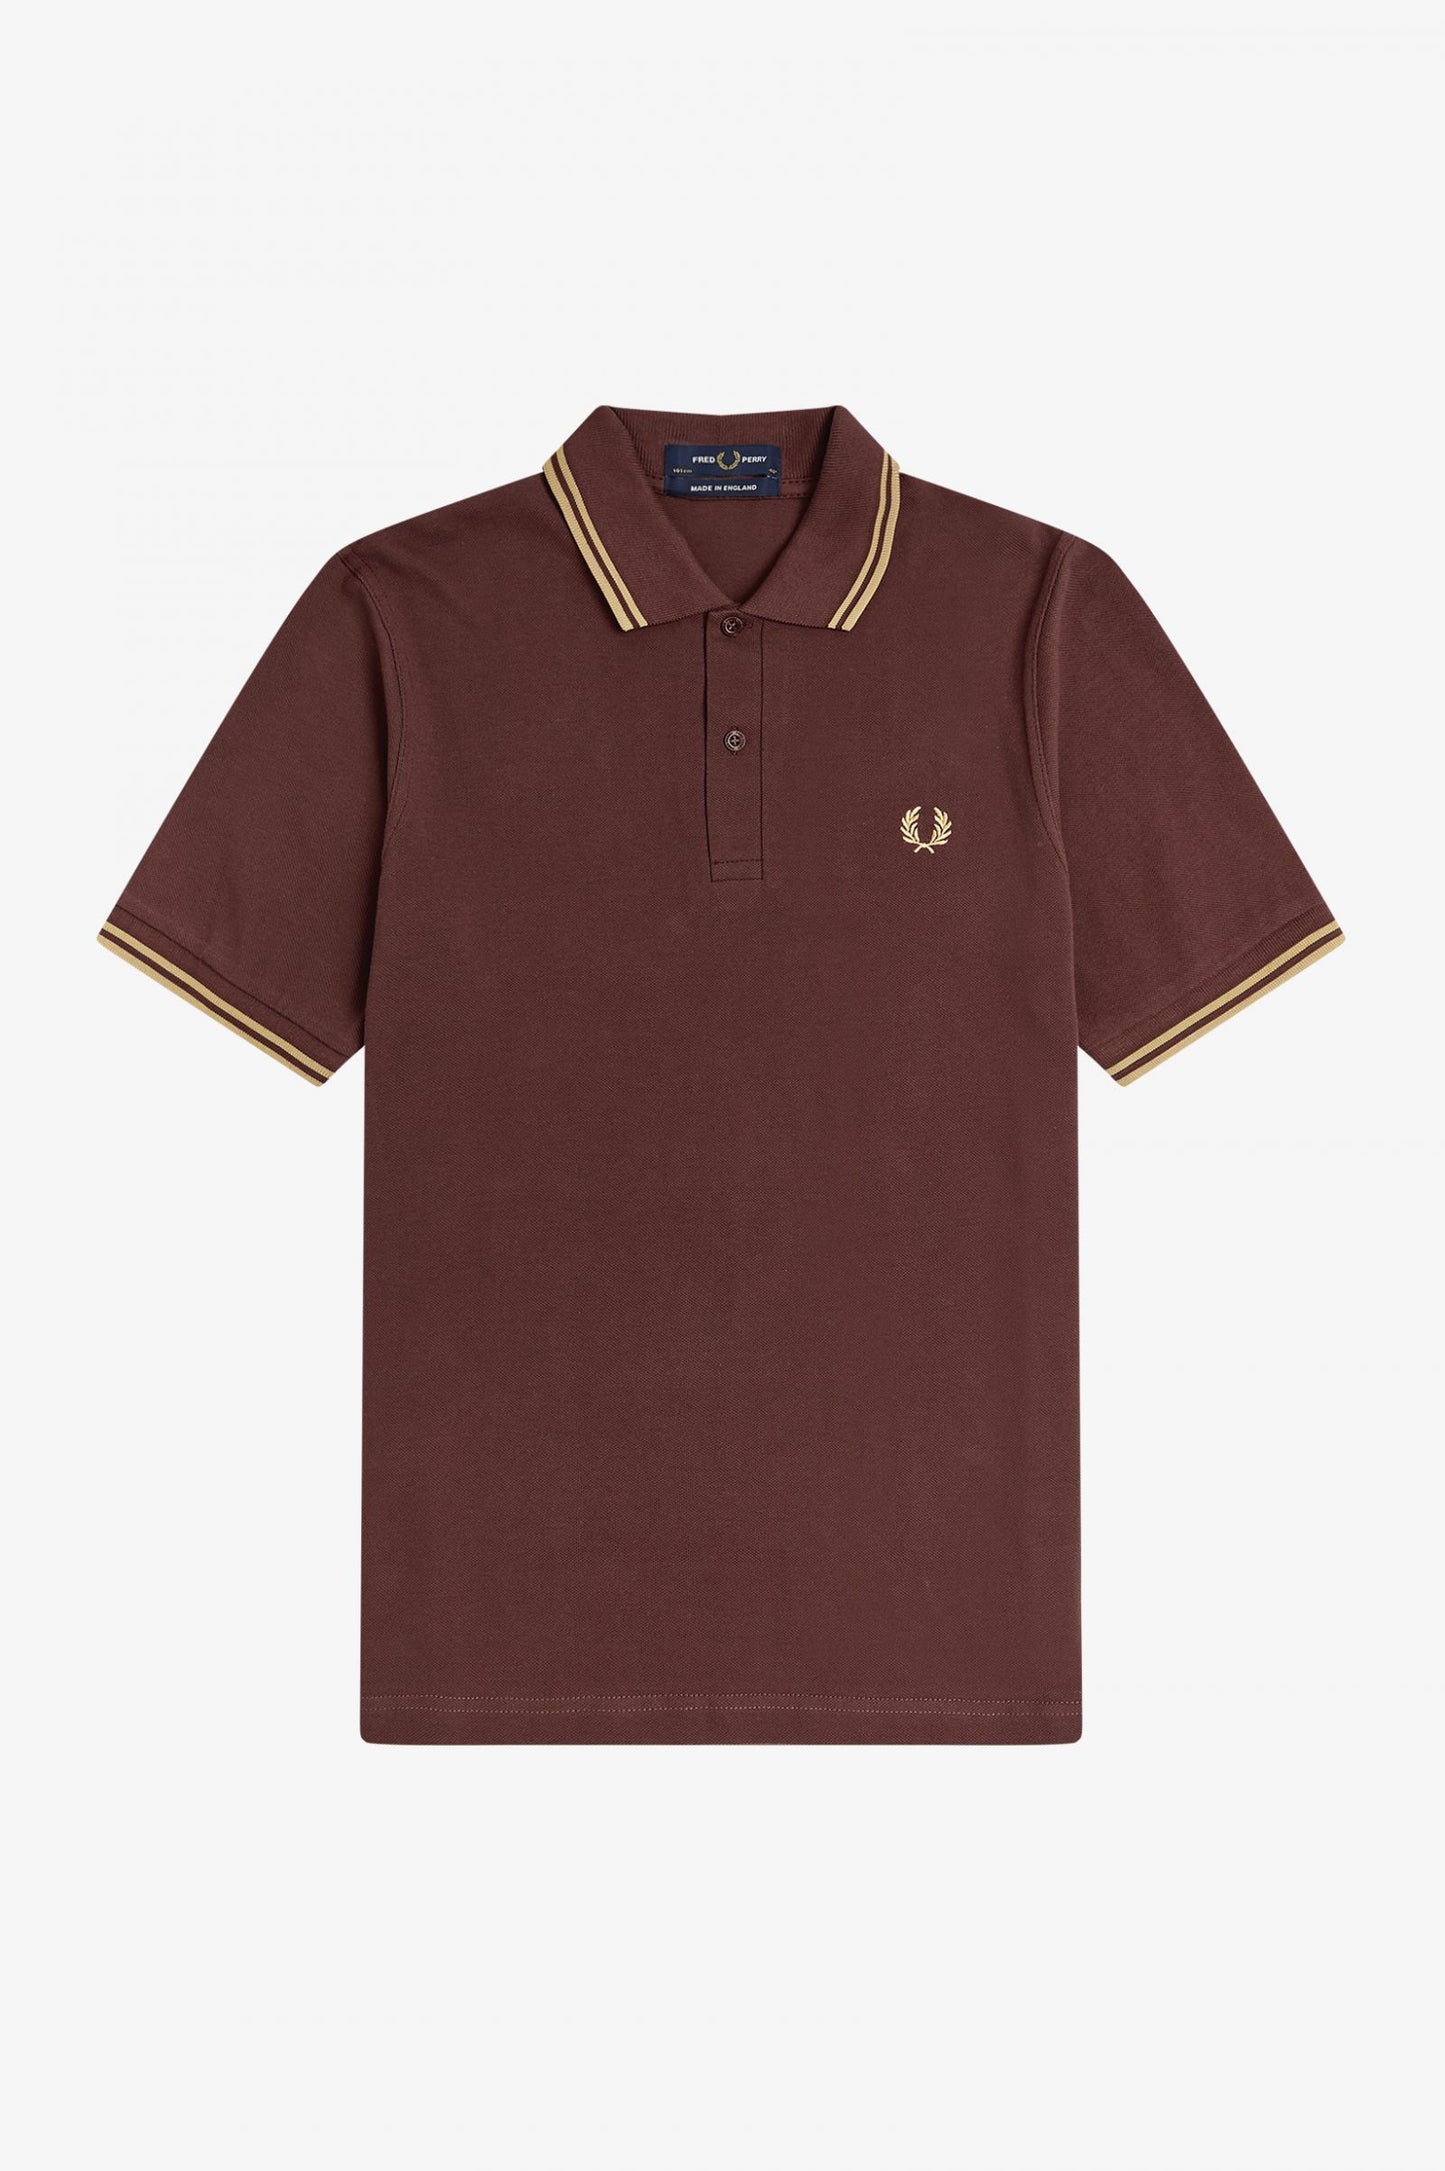 M12 Twin Tipped Fred Perry Shirts